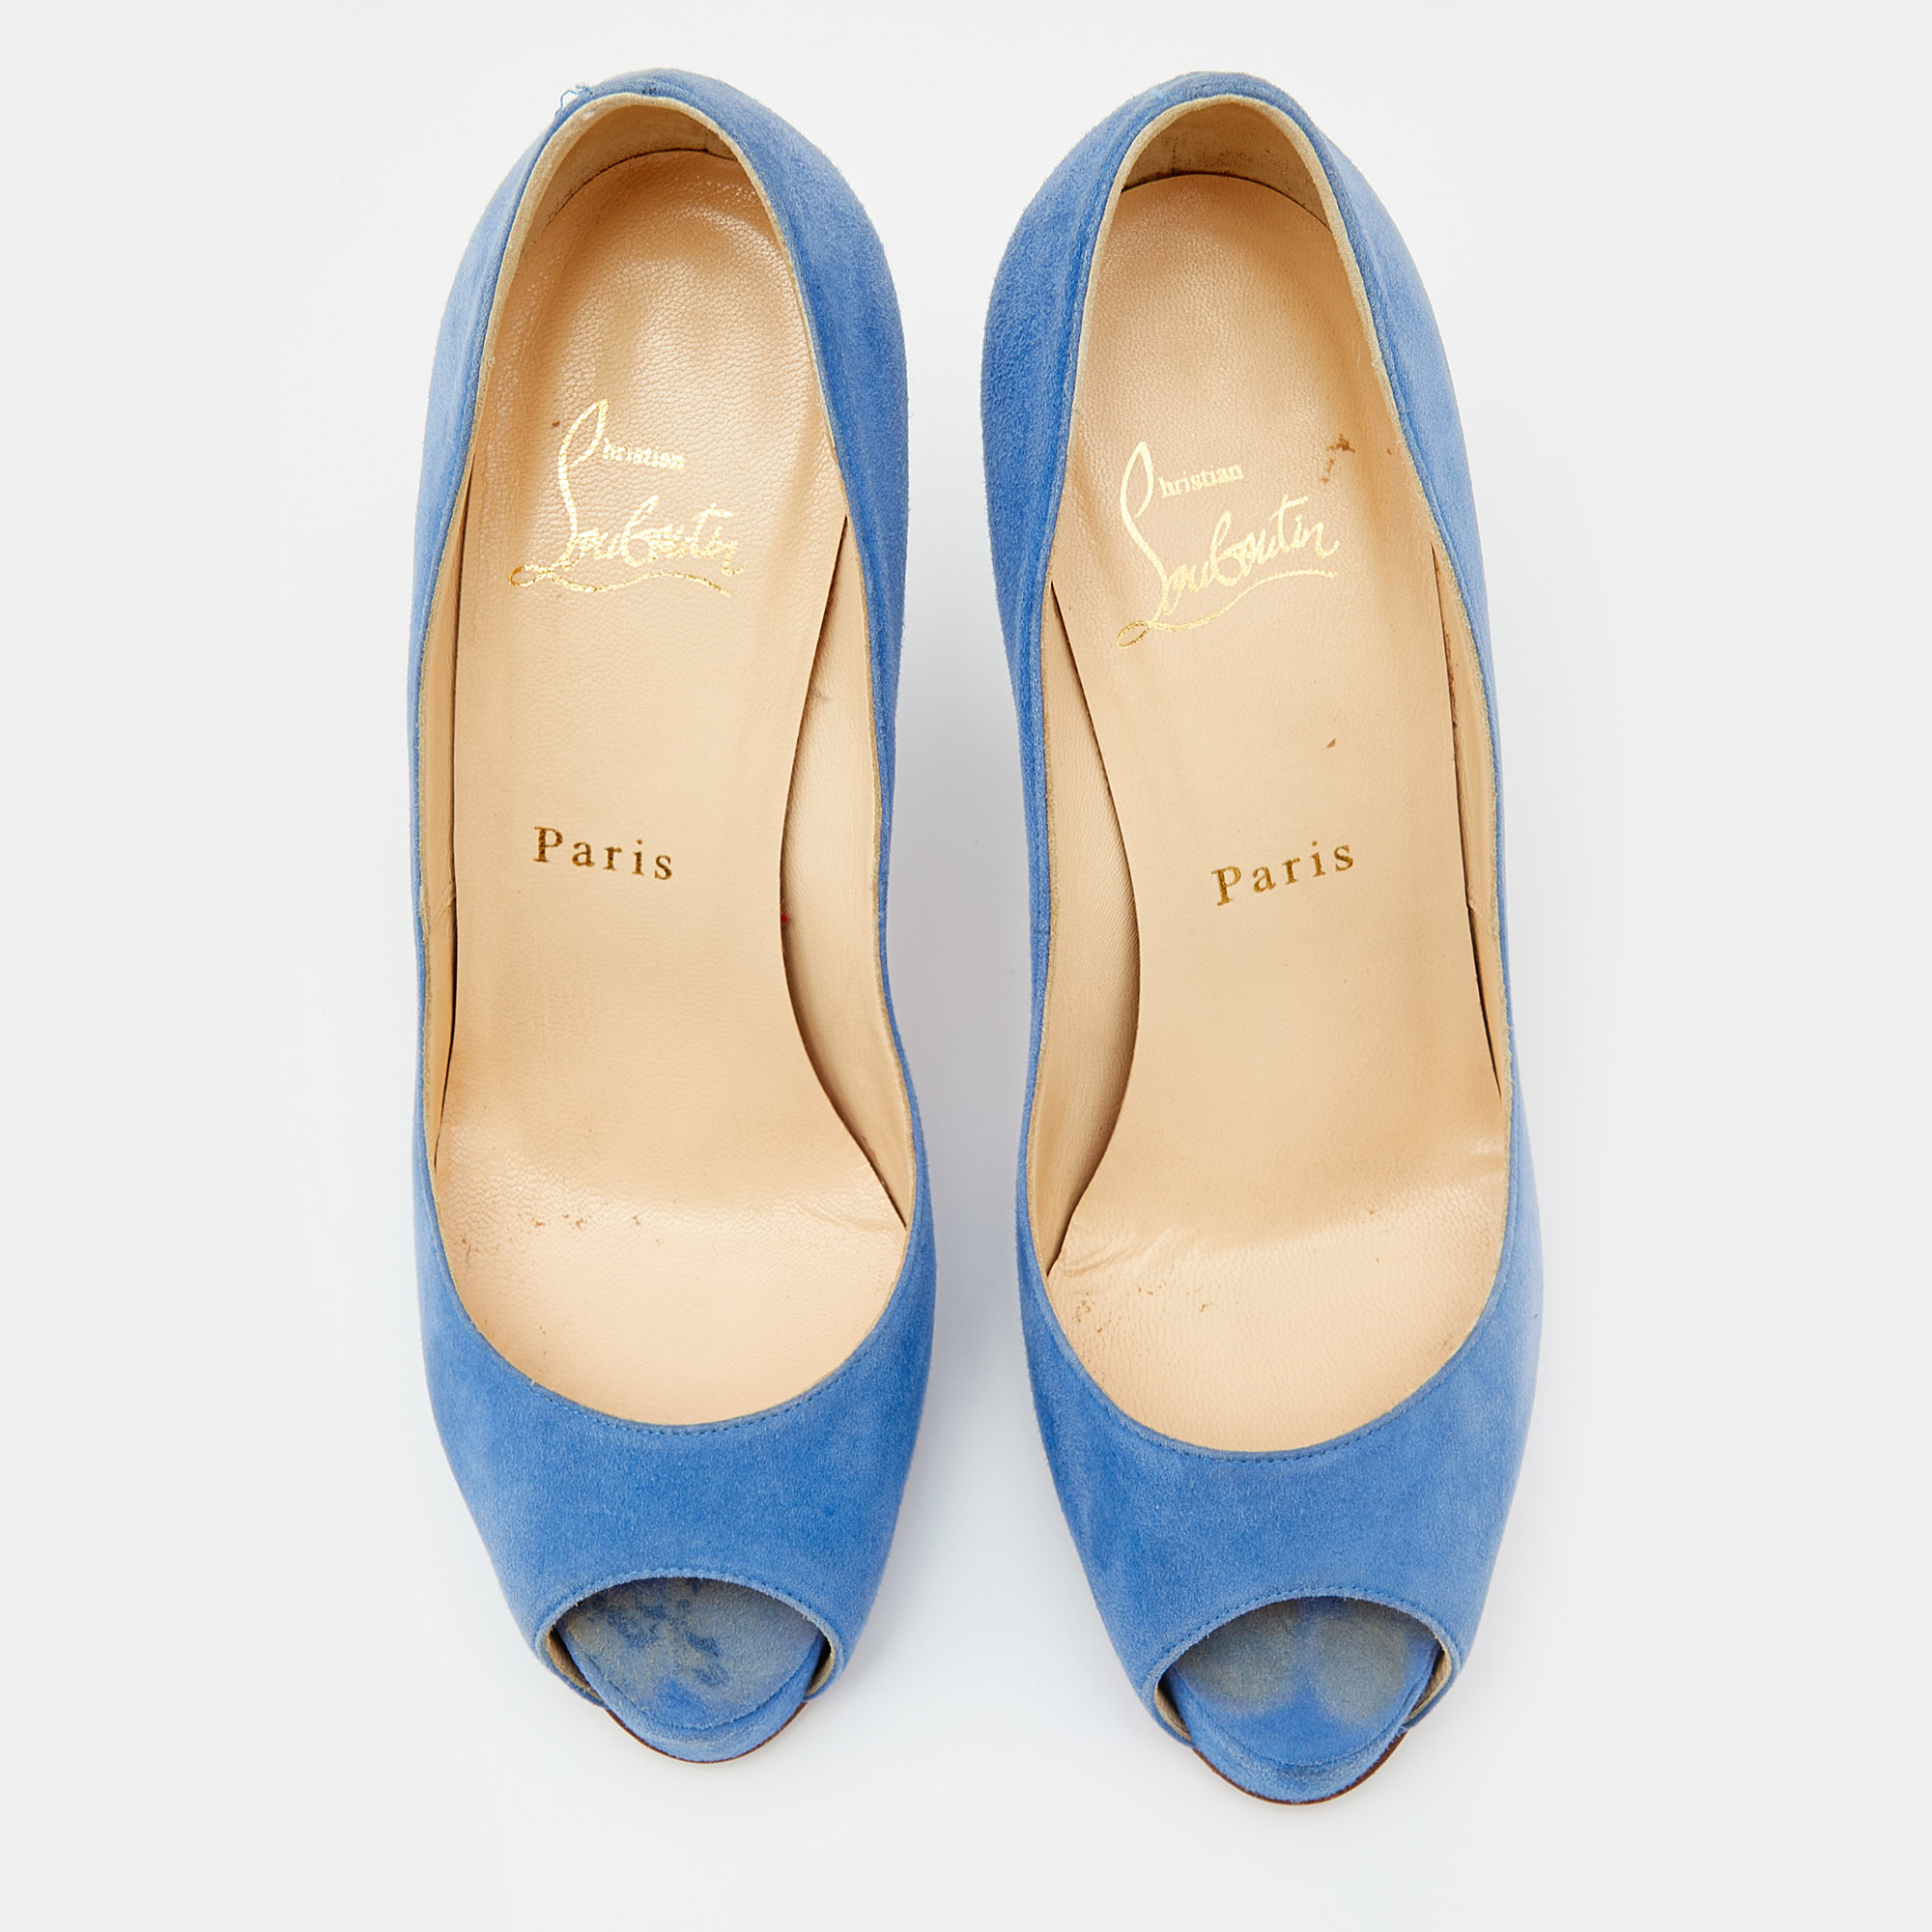 Christian Louboutin Blue Suede New Very Prive Peep Toe Pumps Size 36.5